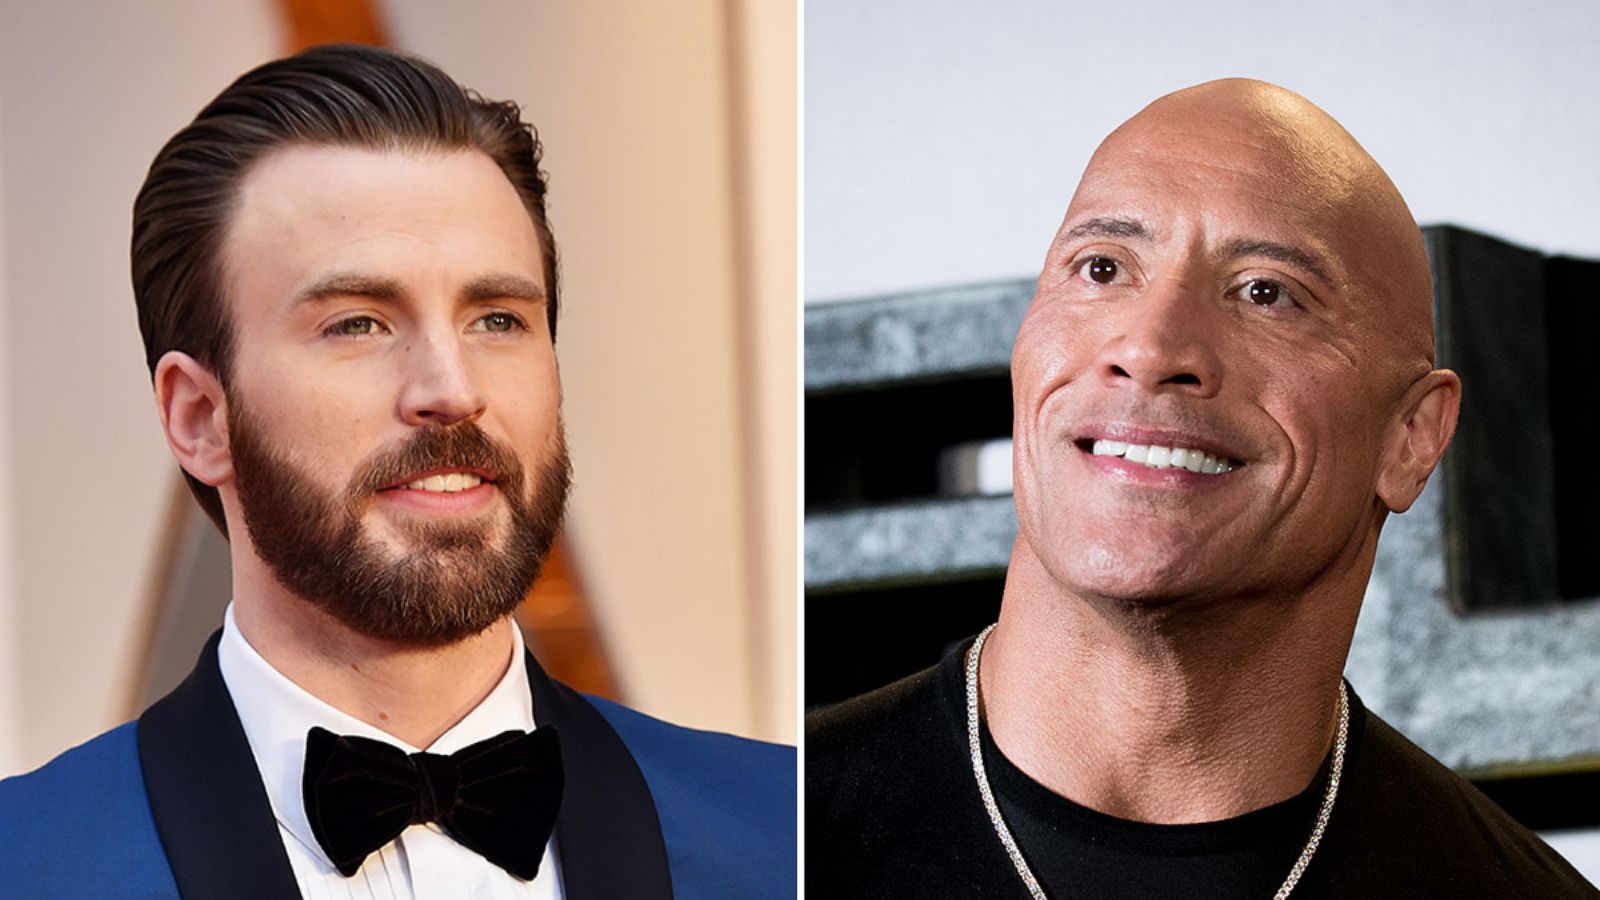 Cap meets The Rock: Chris Evans teaming up with Dwayne Johnson for